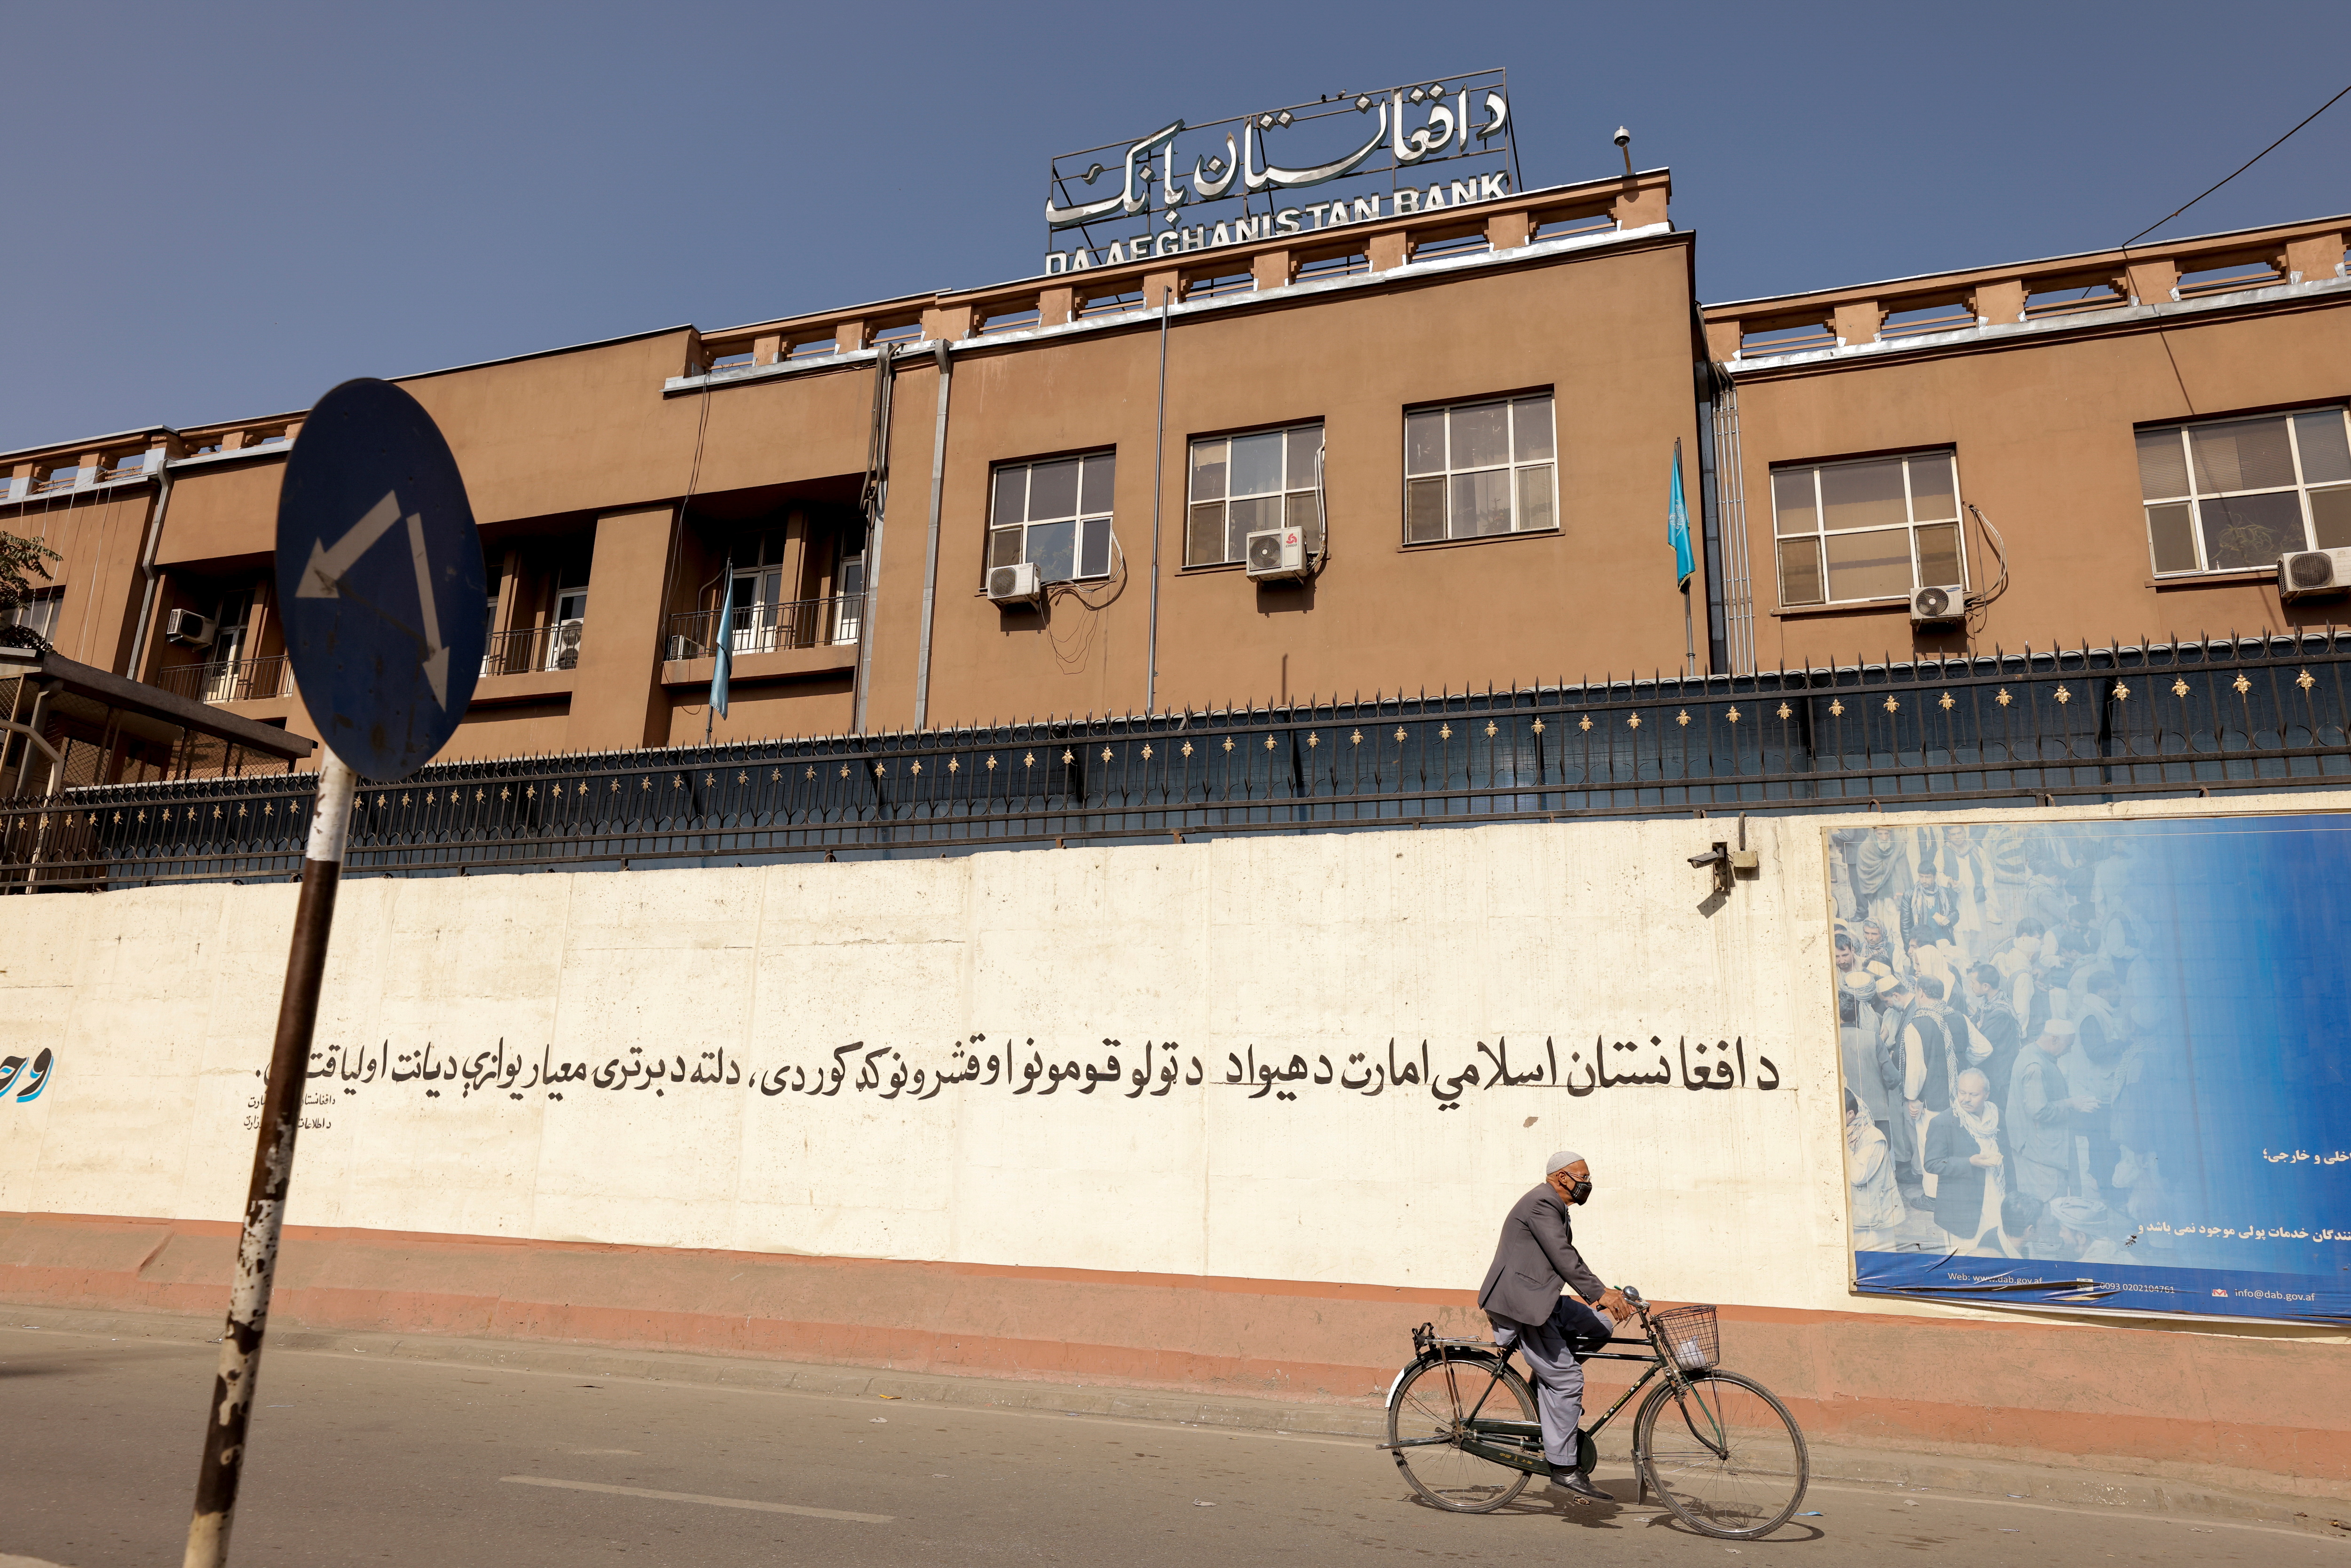 A man rides a bike in front of the Bank of Afghanistan in Kabul